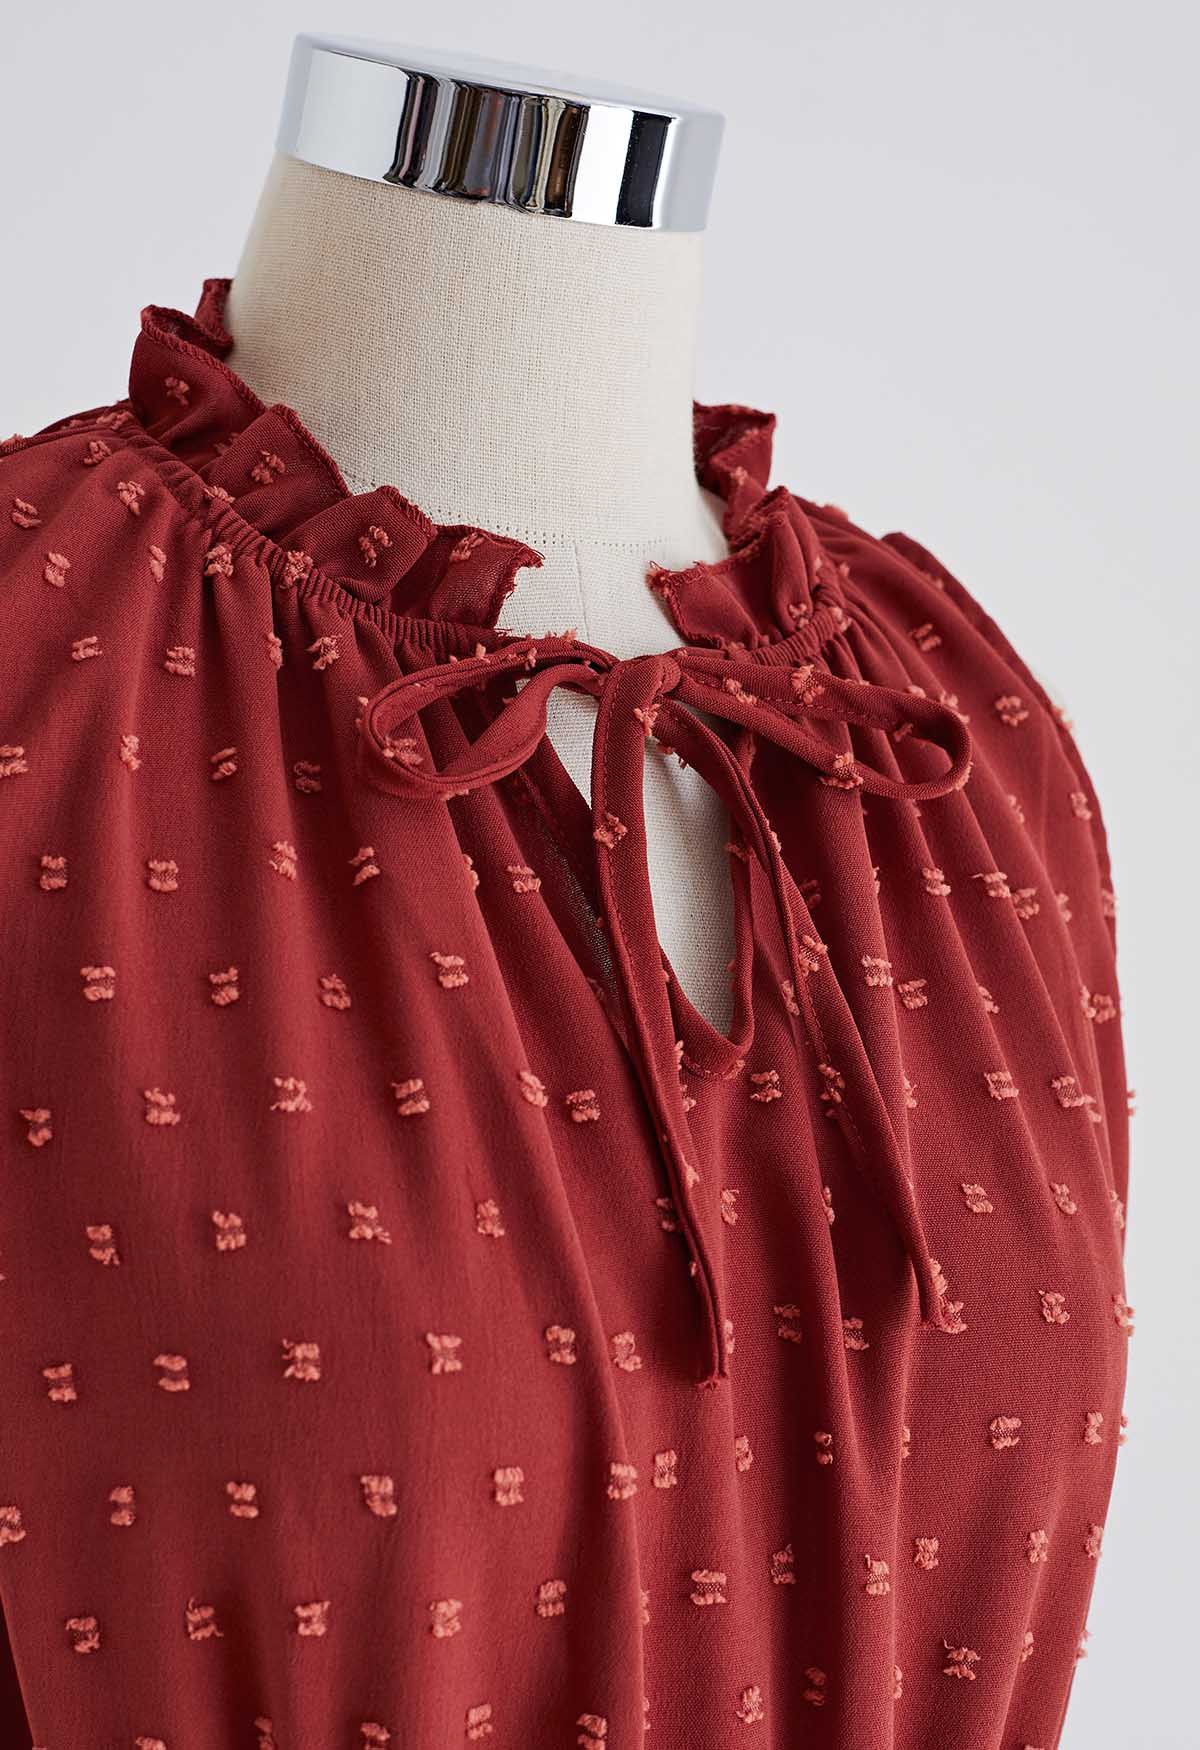 Tie-Neck Flock Dot Pleated Dress in Rust Red